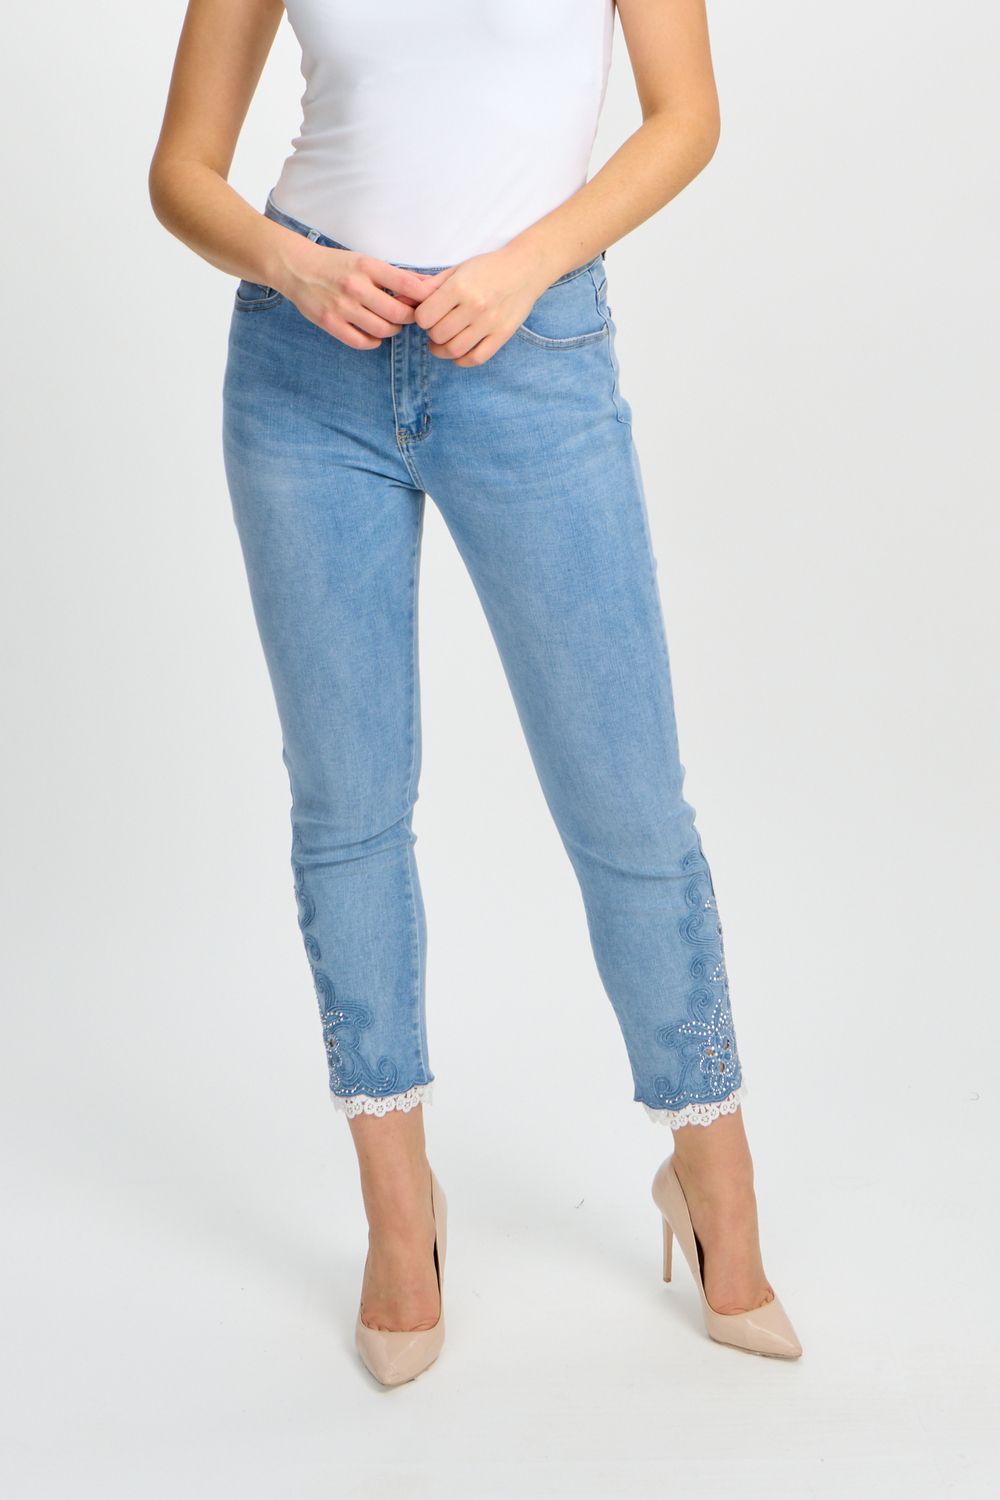 Bleached Embroidered Mid-Rise Jeans Style 80507-6100. As Sample